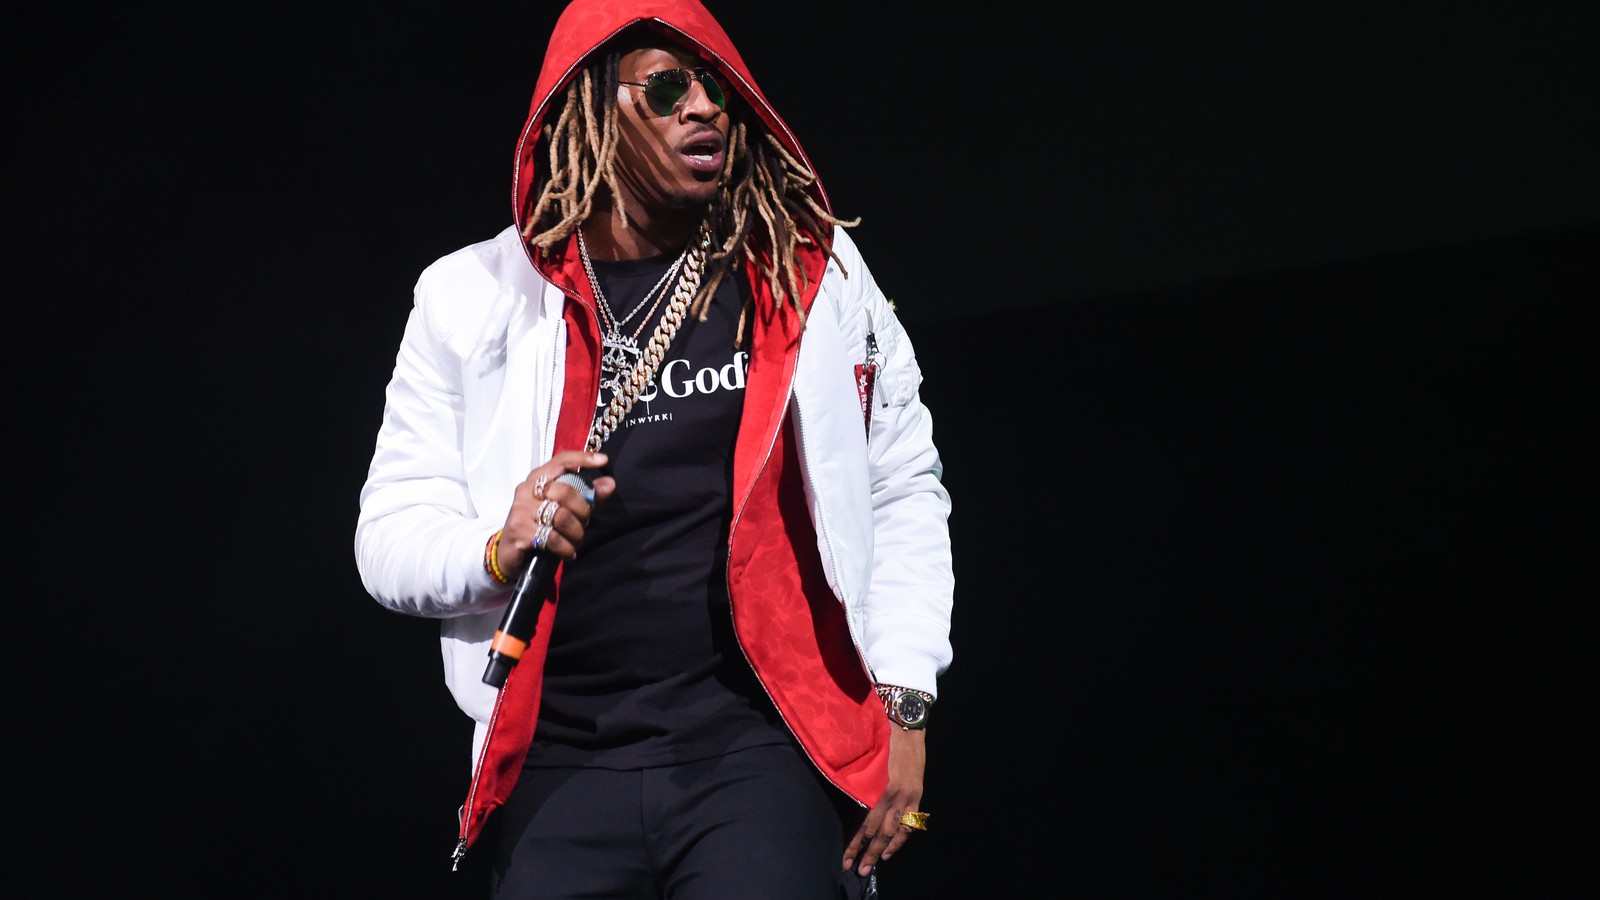 The rapper future contains multitudes on future and hndrxx